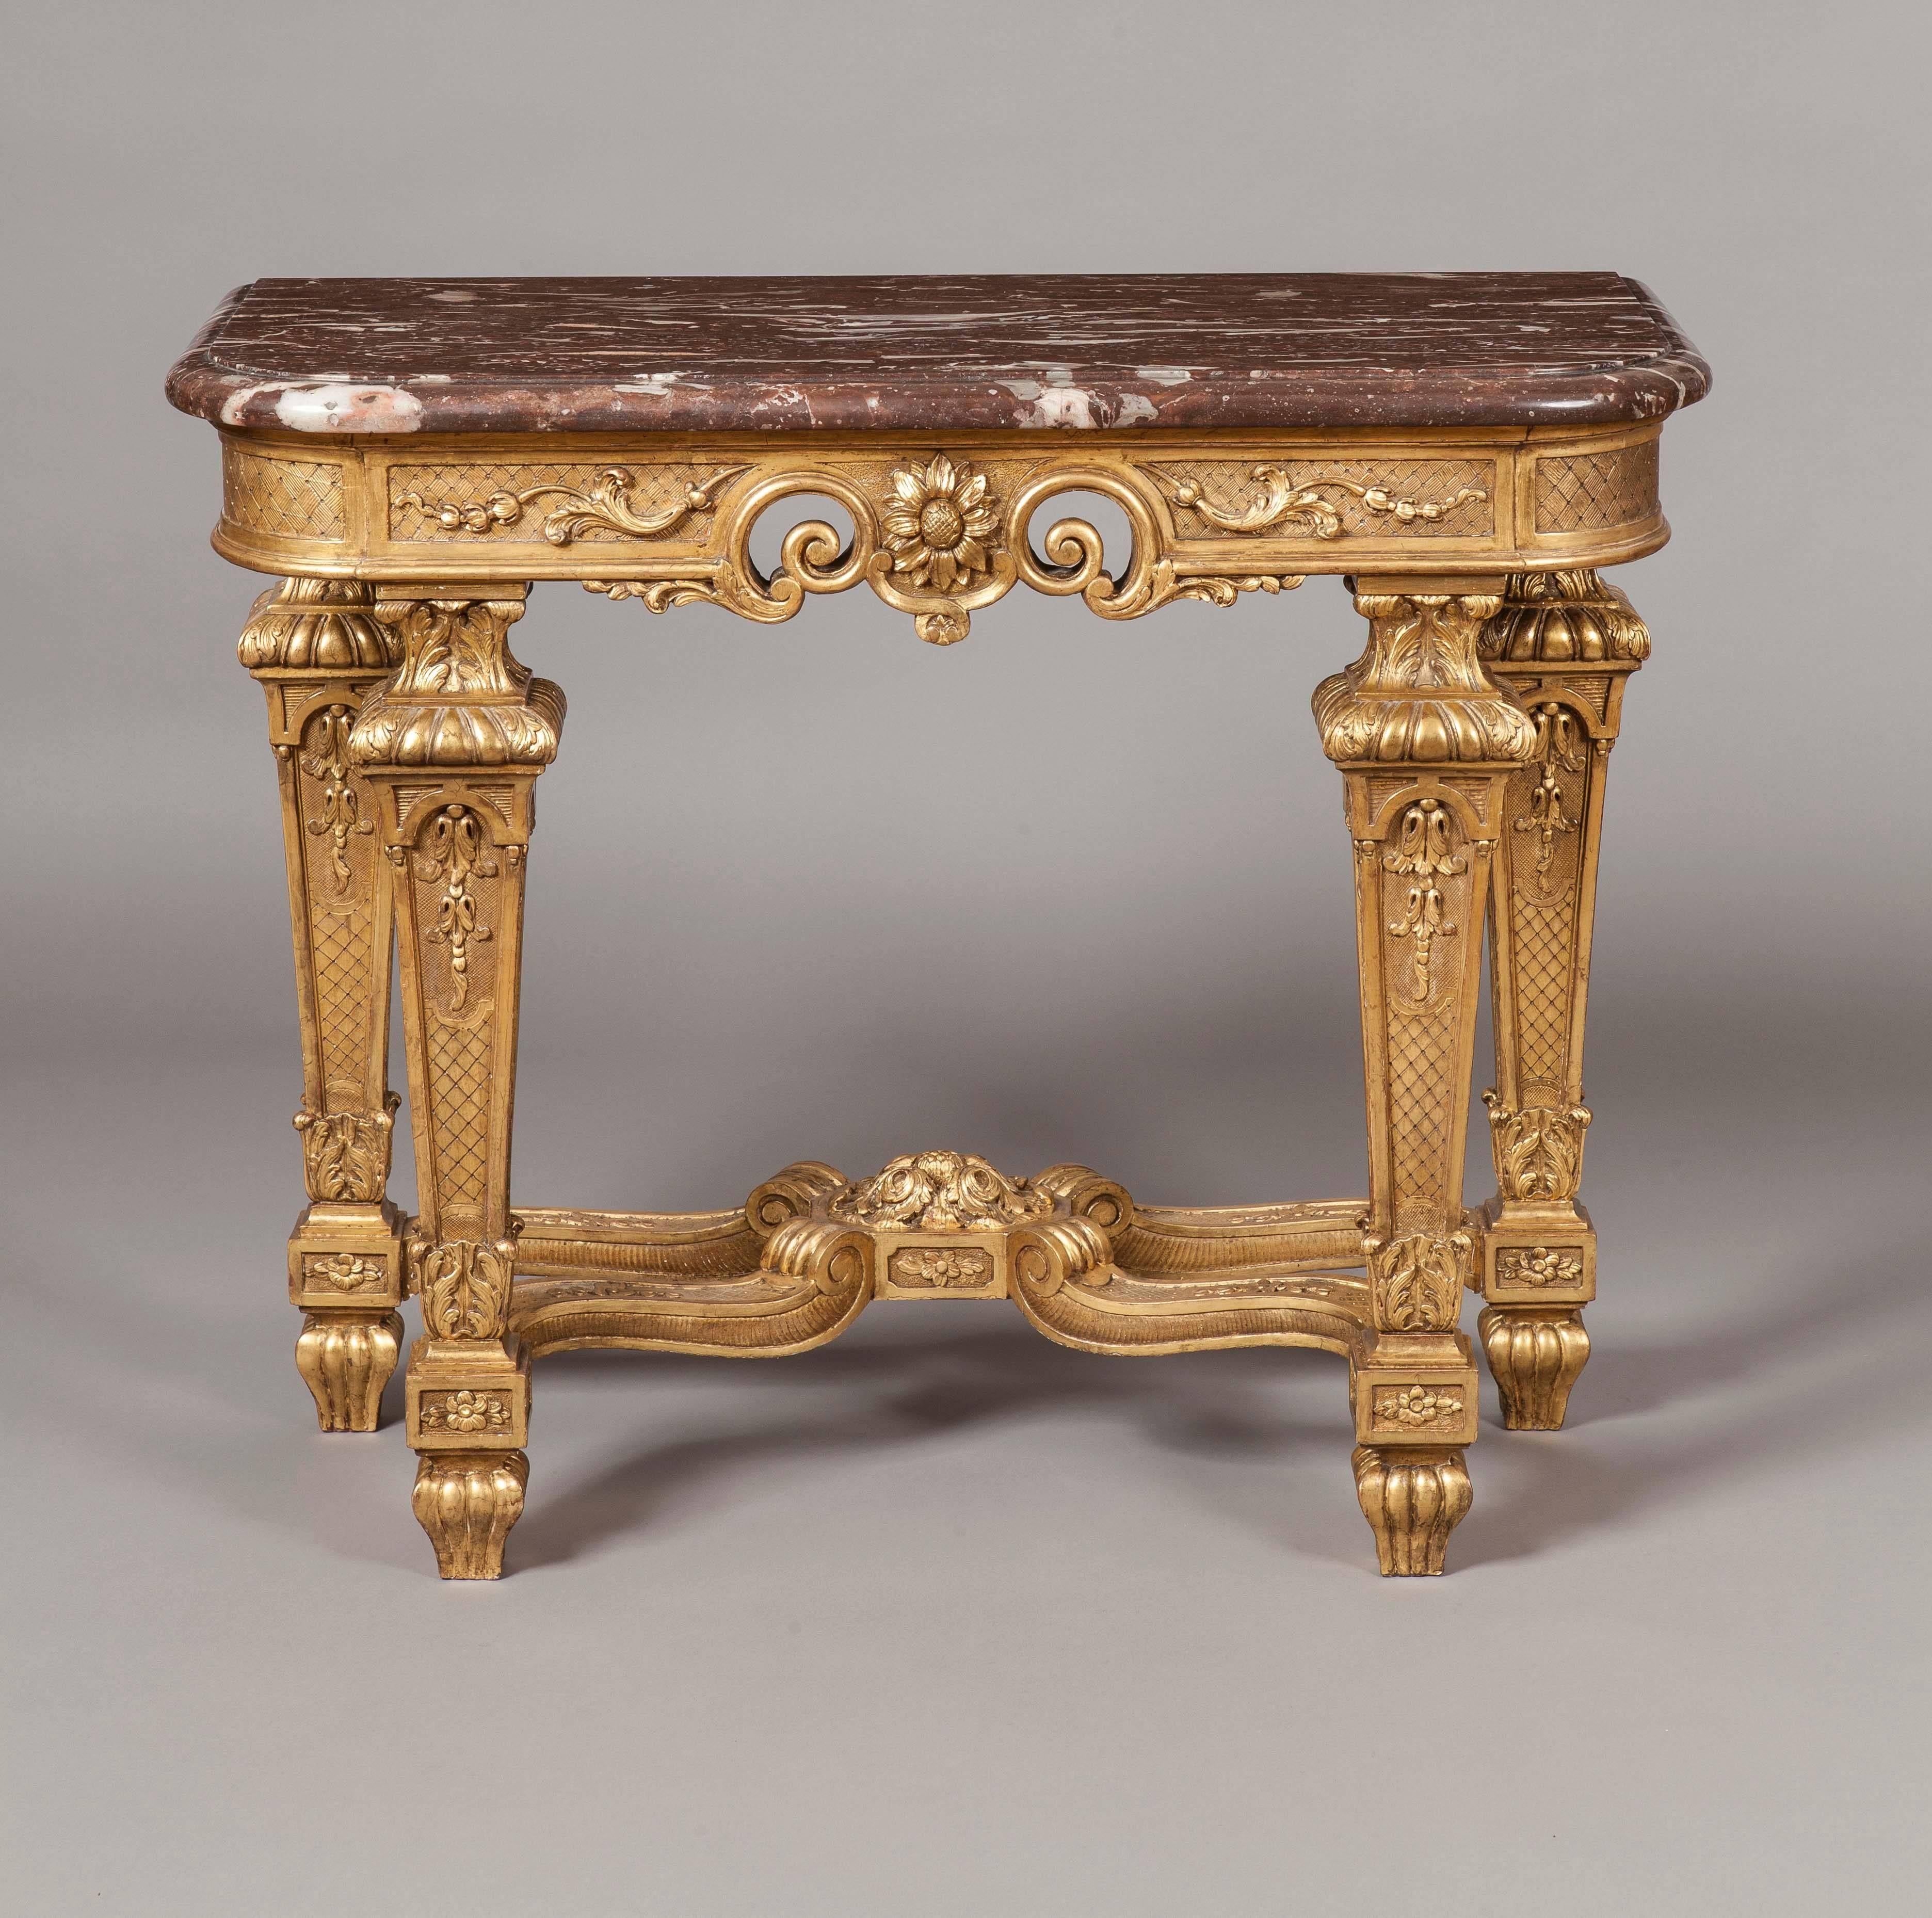 Constructed in giltwood, carved and decorated, with red griotte marble platforms; of rectangular form, rising from tapering channelled and collared legs decorated with pendant foliates and scrolls; the conjoined shaped ‘X’ form stretchers having